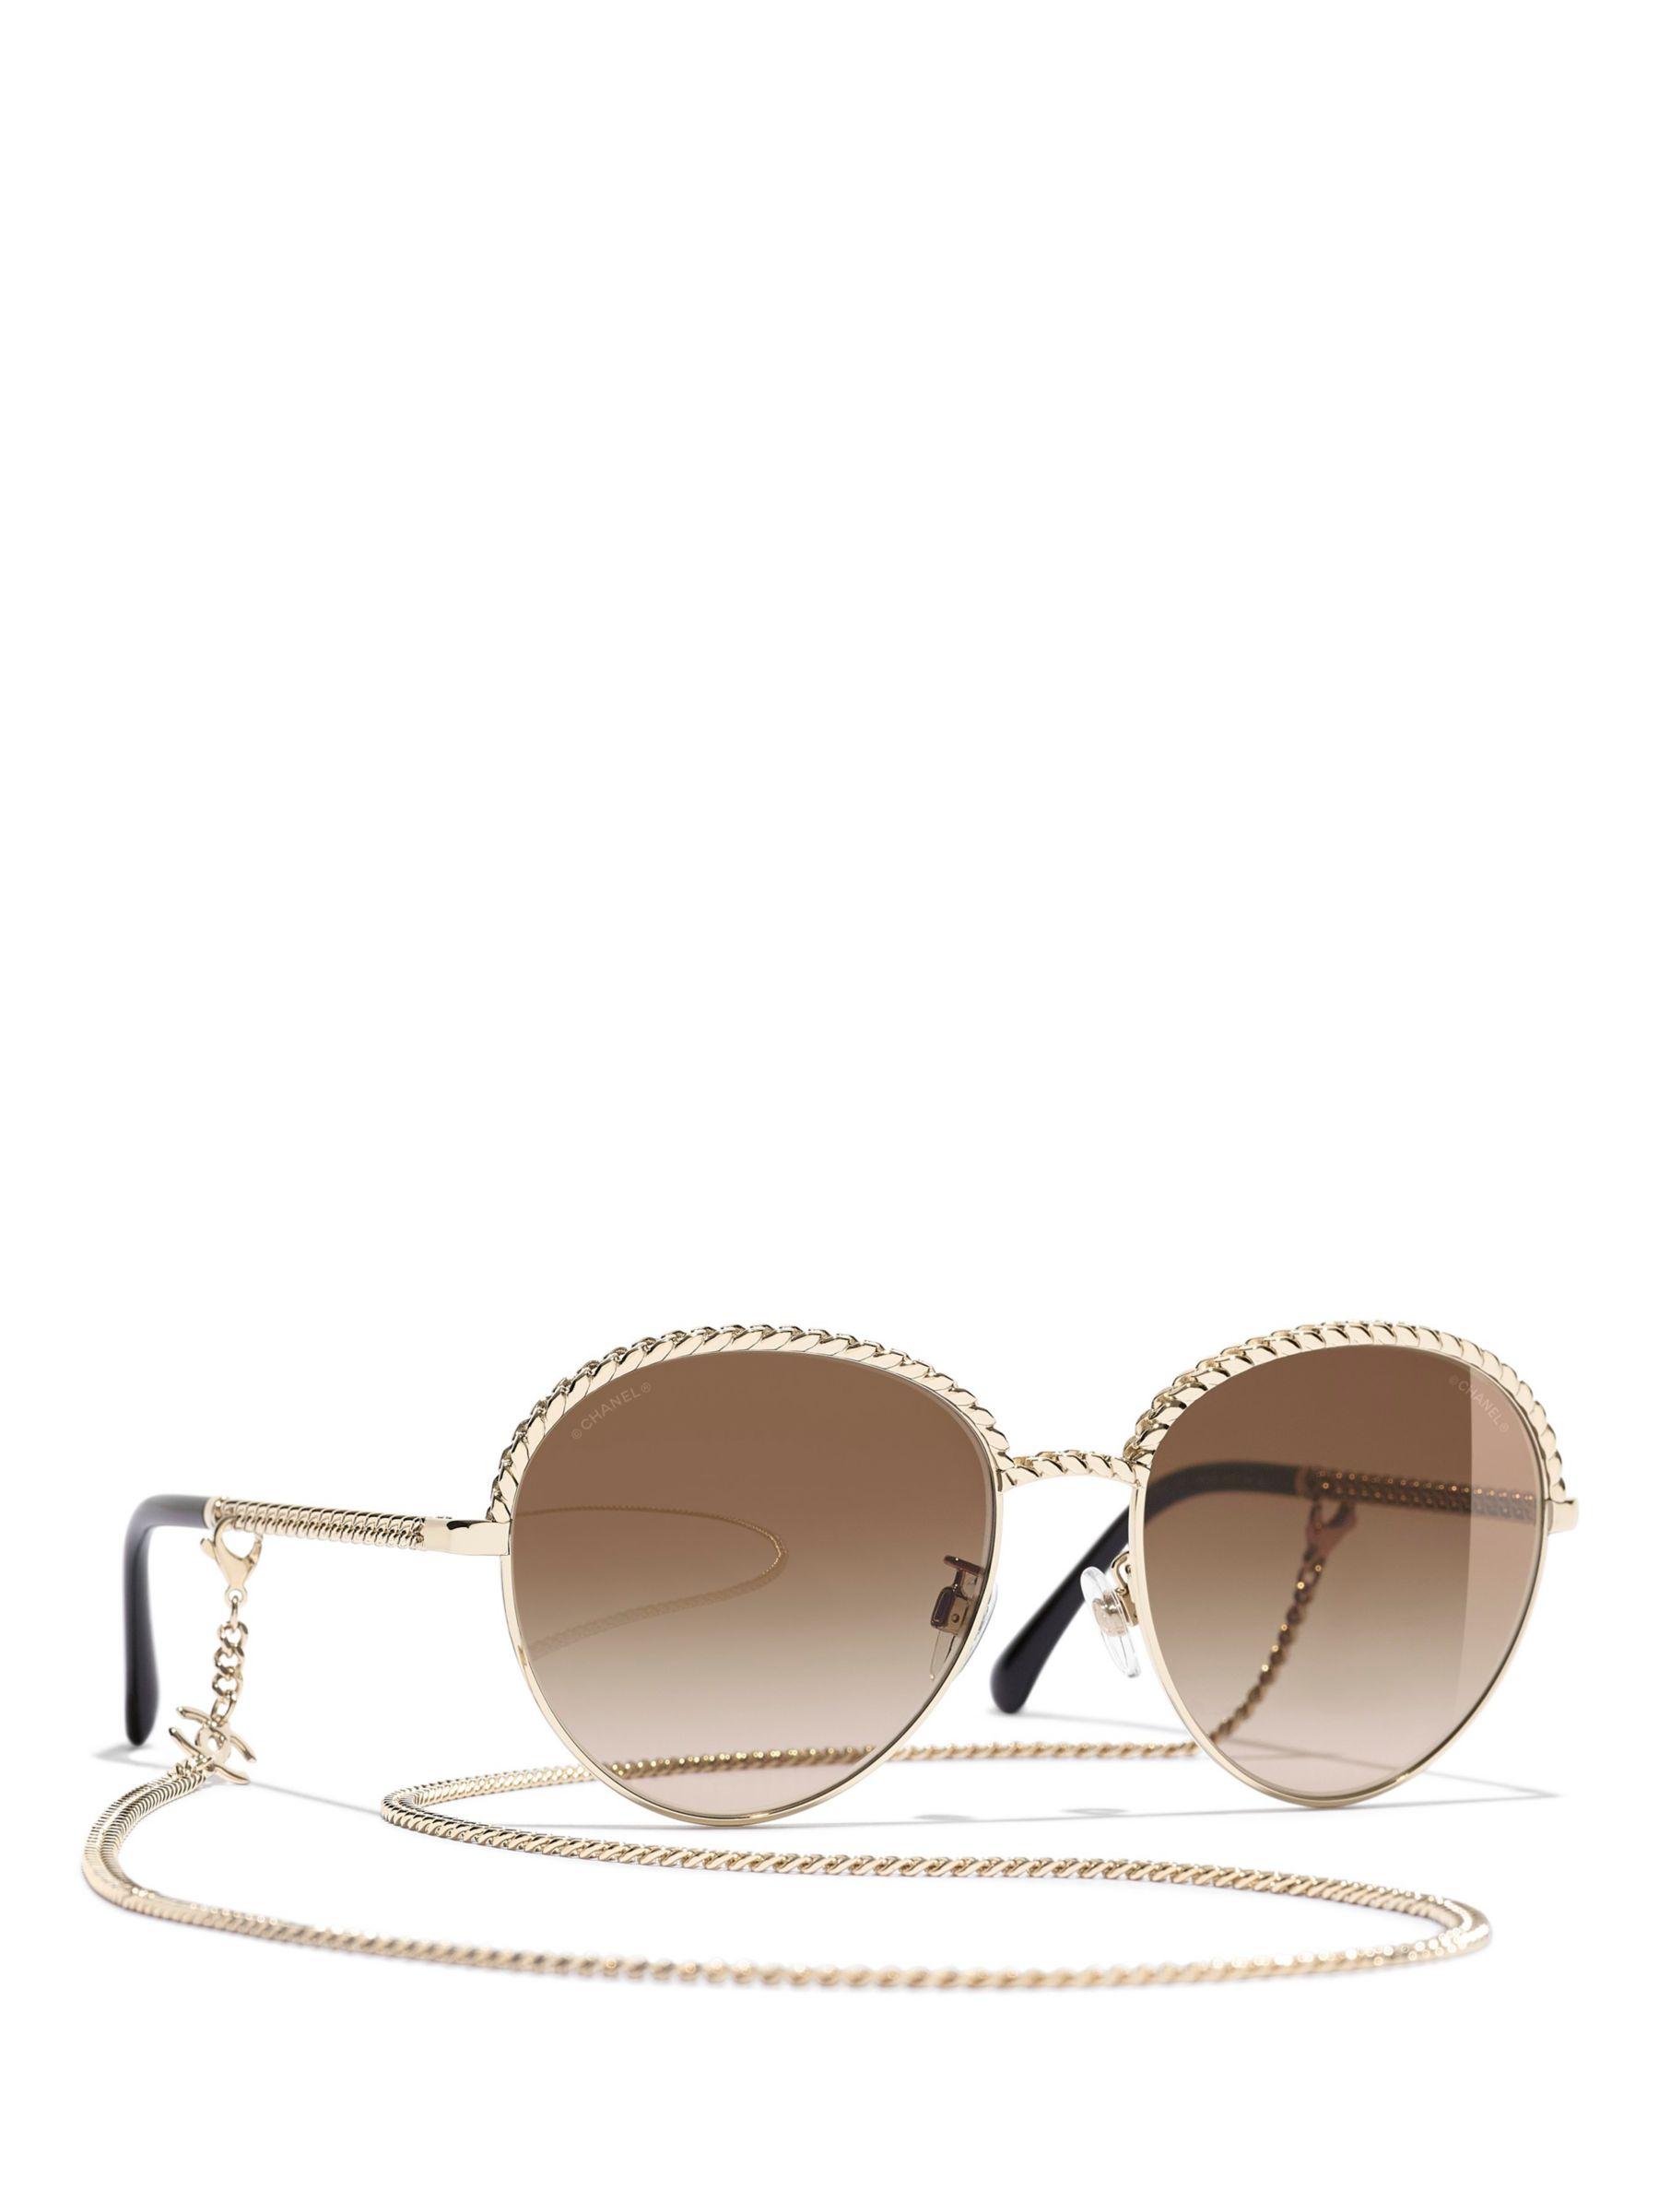 Chanel Oval Sunglasses Ch4242 Pale Gold/brown Gradient